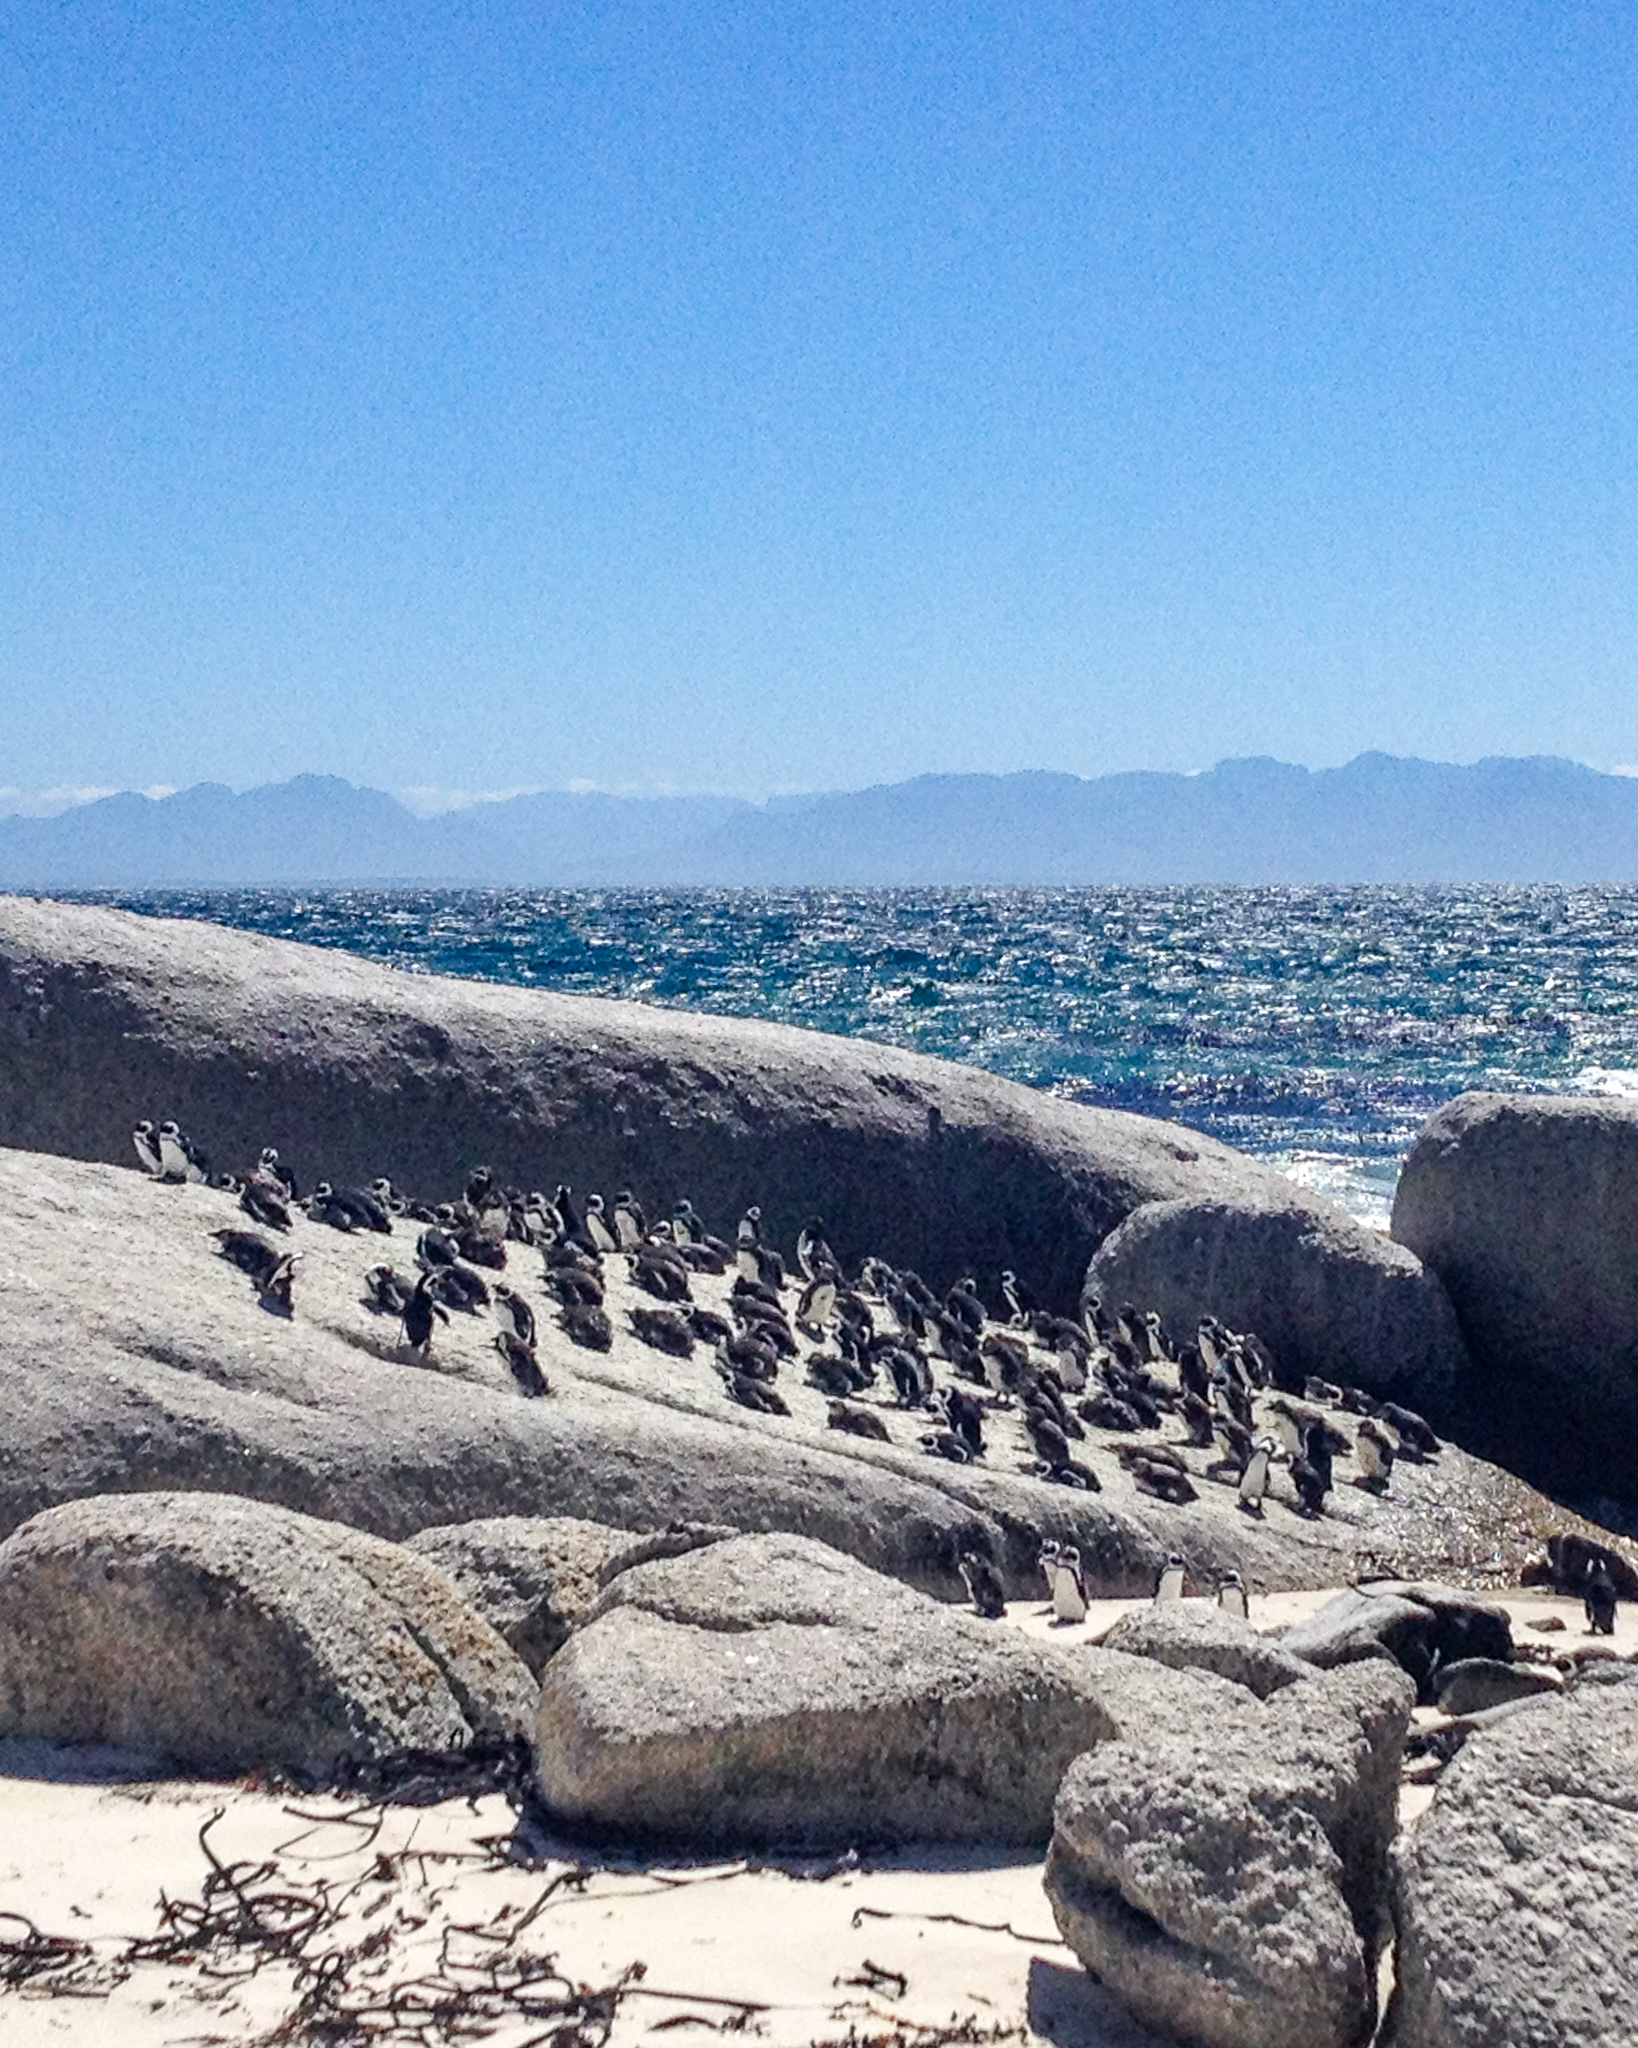 Penguins on Boulders Beach in South Africa
